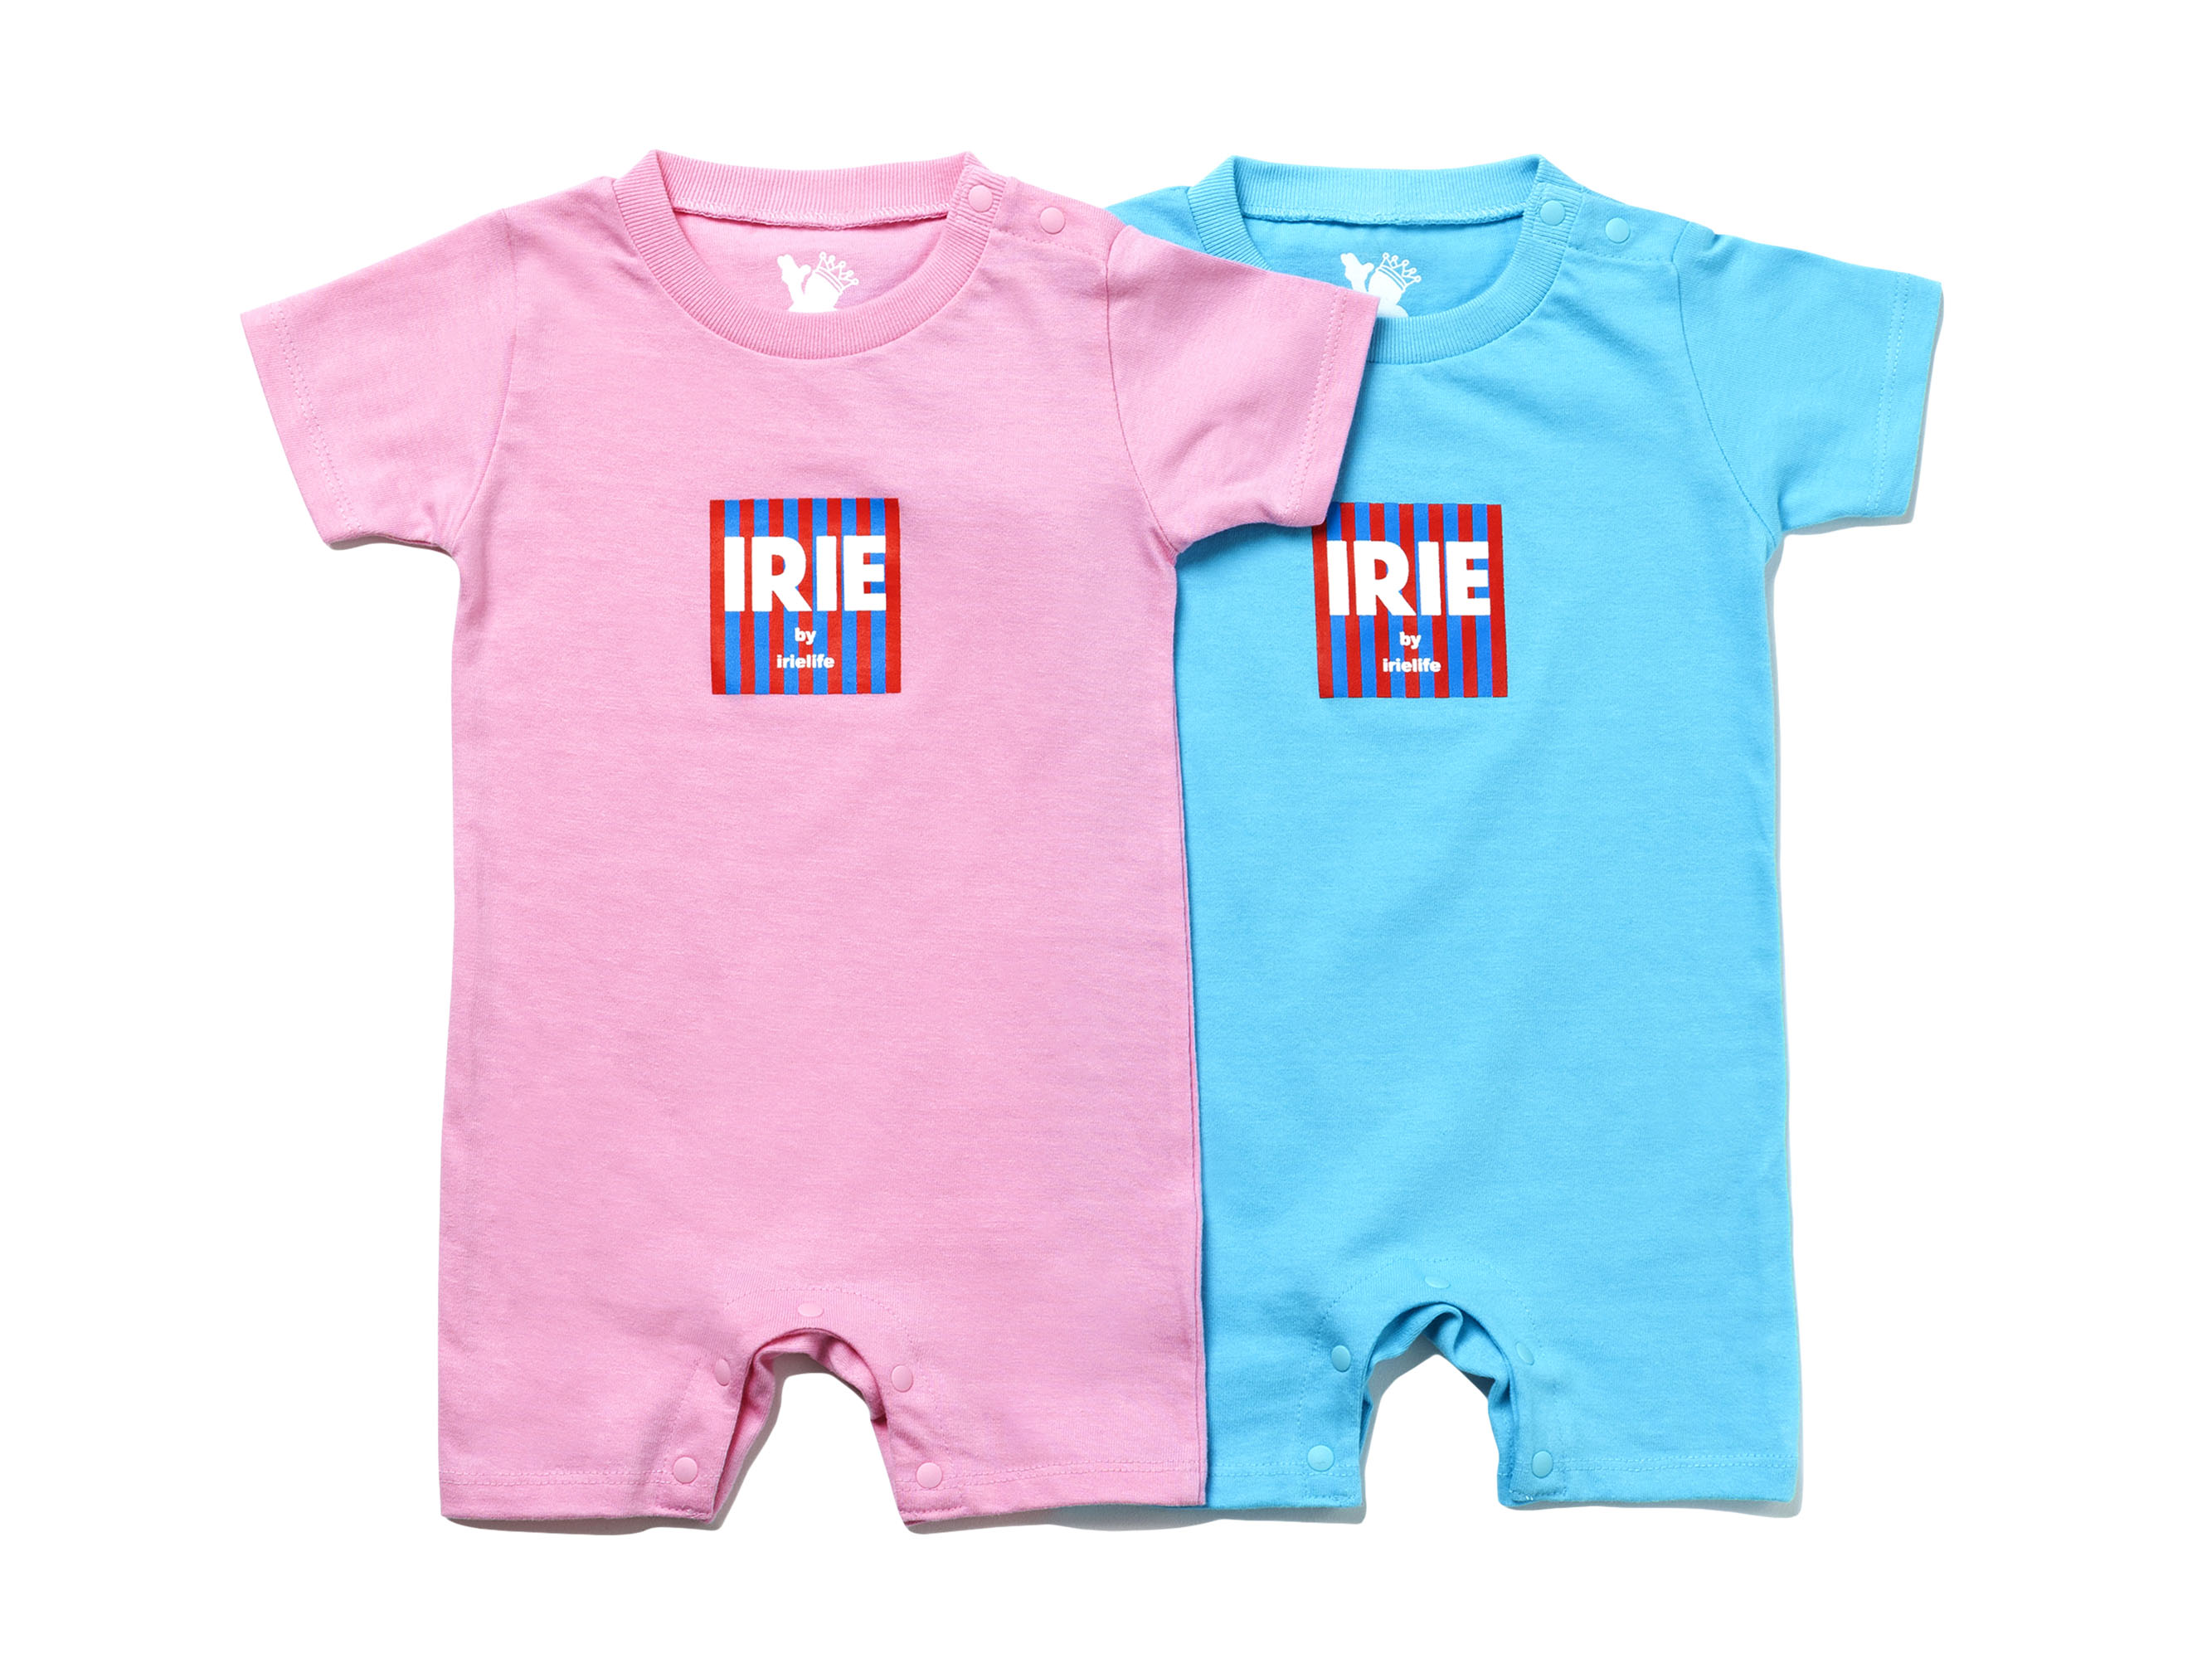 IRIE TAG ROMPERS - IRIE by irielife